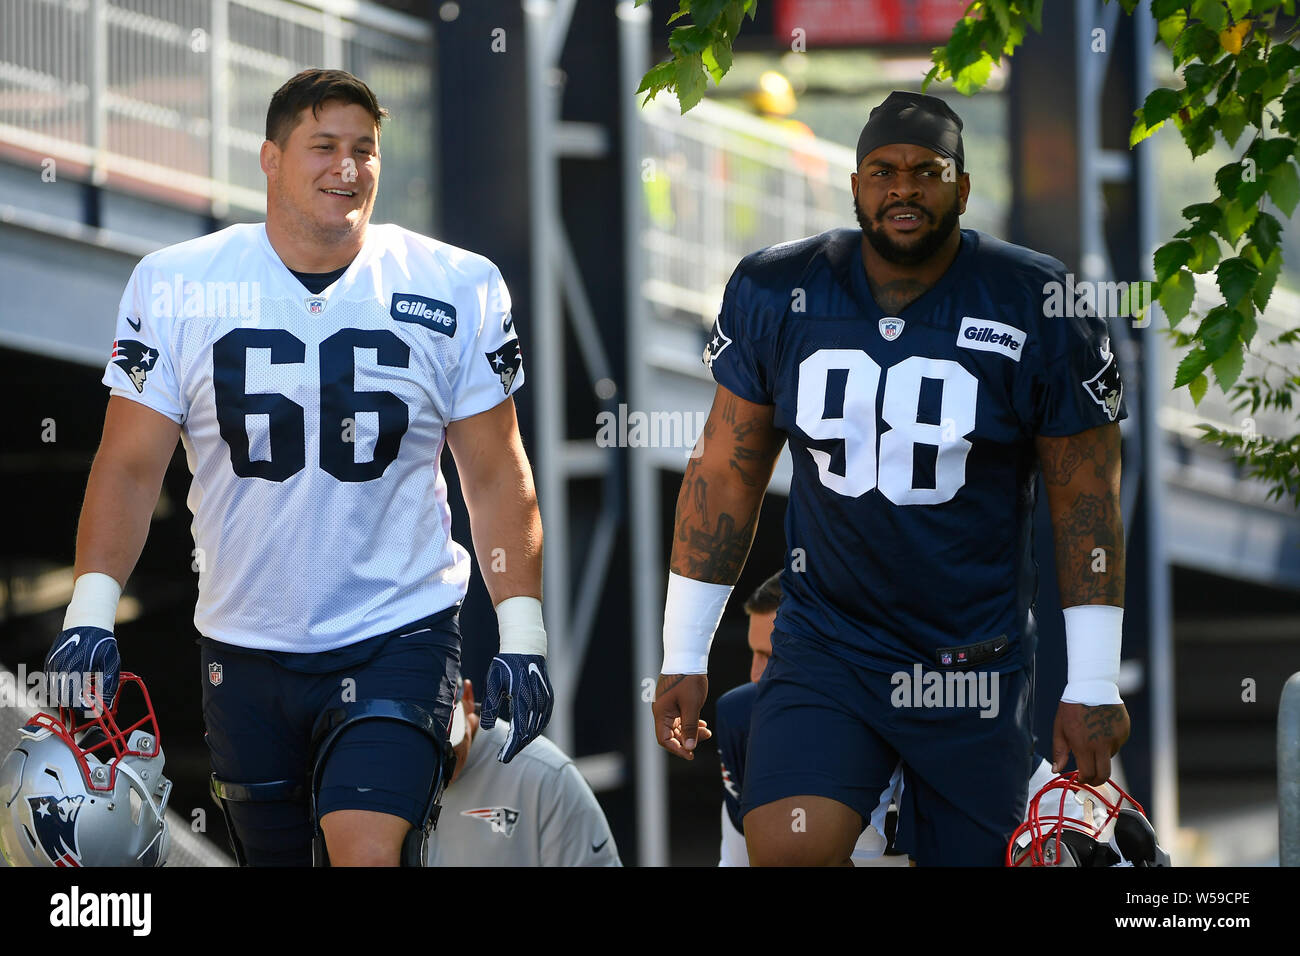 Foxborough, Massachusetts, USA. 26th July, 2019. New England Patriots  offensive lineman James Ferentz (66) and defensive lineman Mikke Pennel Jr.  (98) at the New England Patriots training camp held on the practice